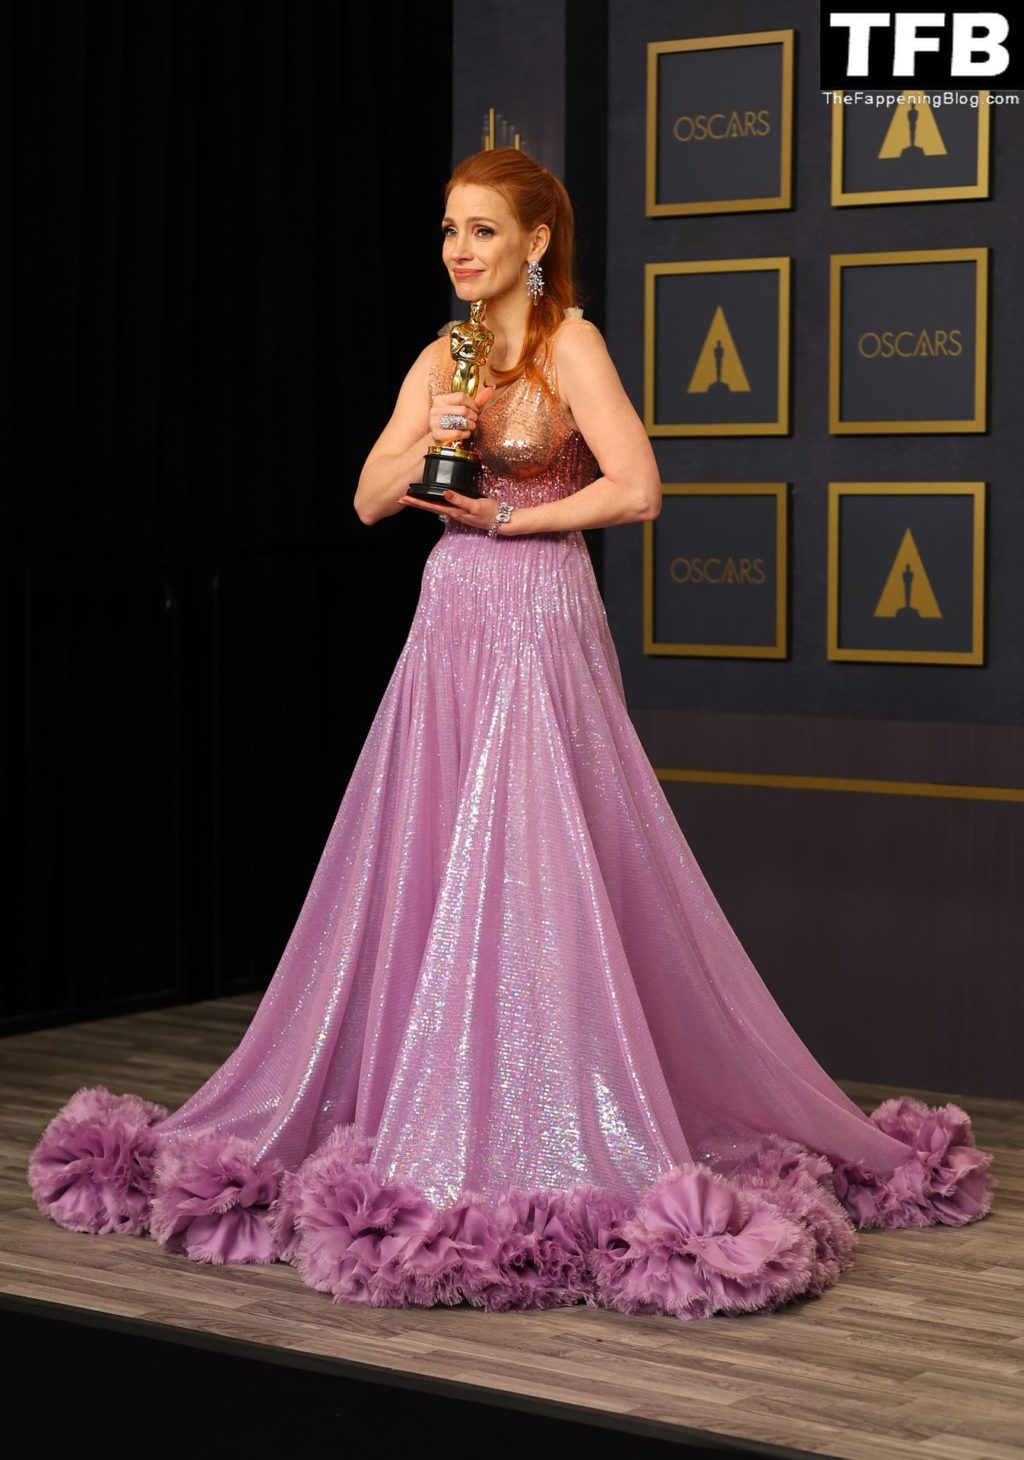 Jessica Chastain Sexy The Fappening Blog 87 1024x1460 - Jessica Chastain Poses With Her Oscar at the 94th Academy Awards (150 Photos)